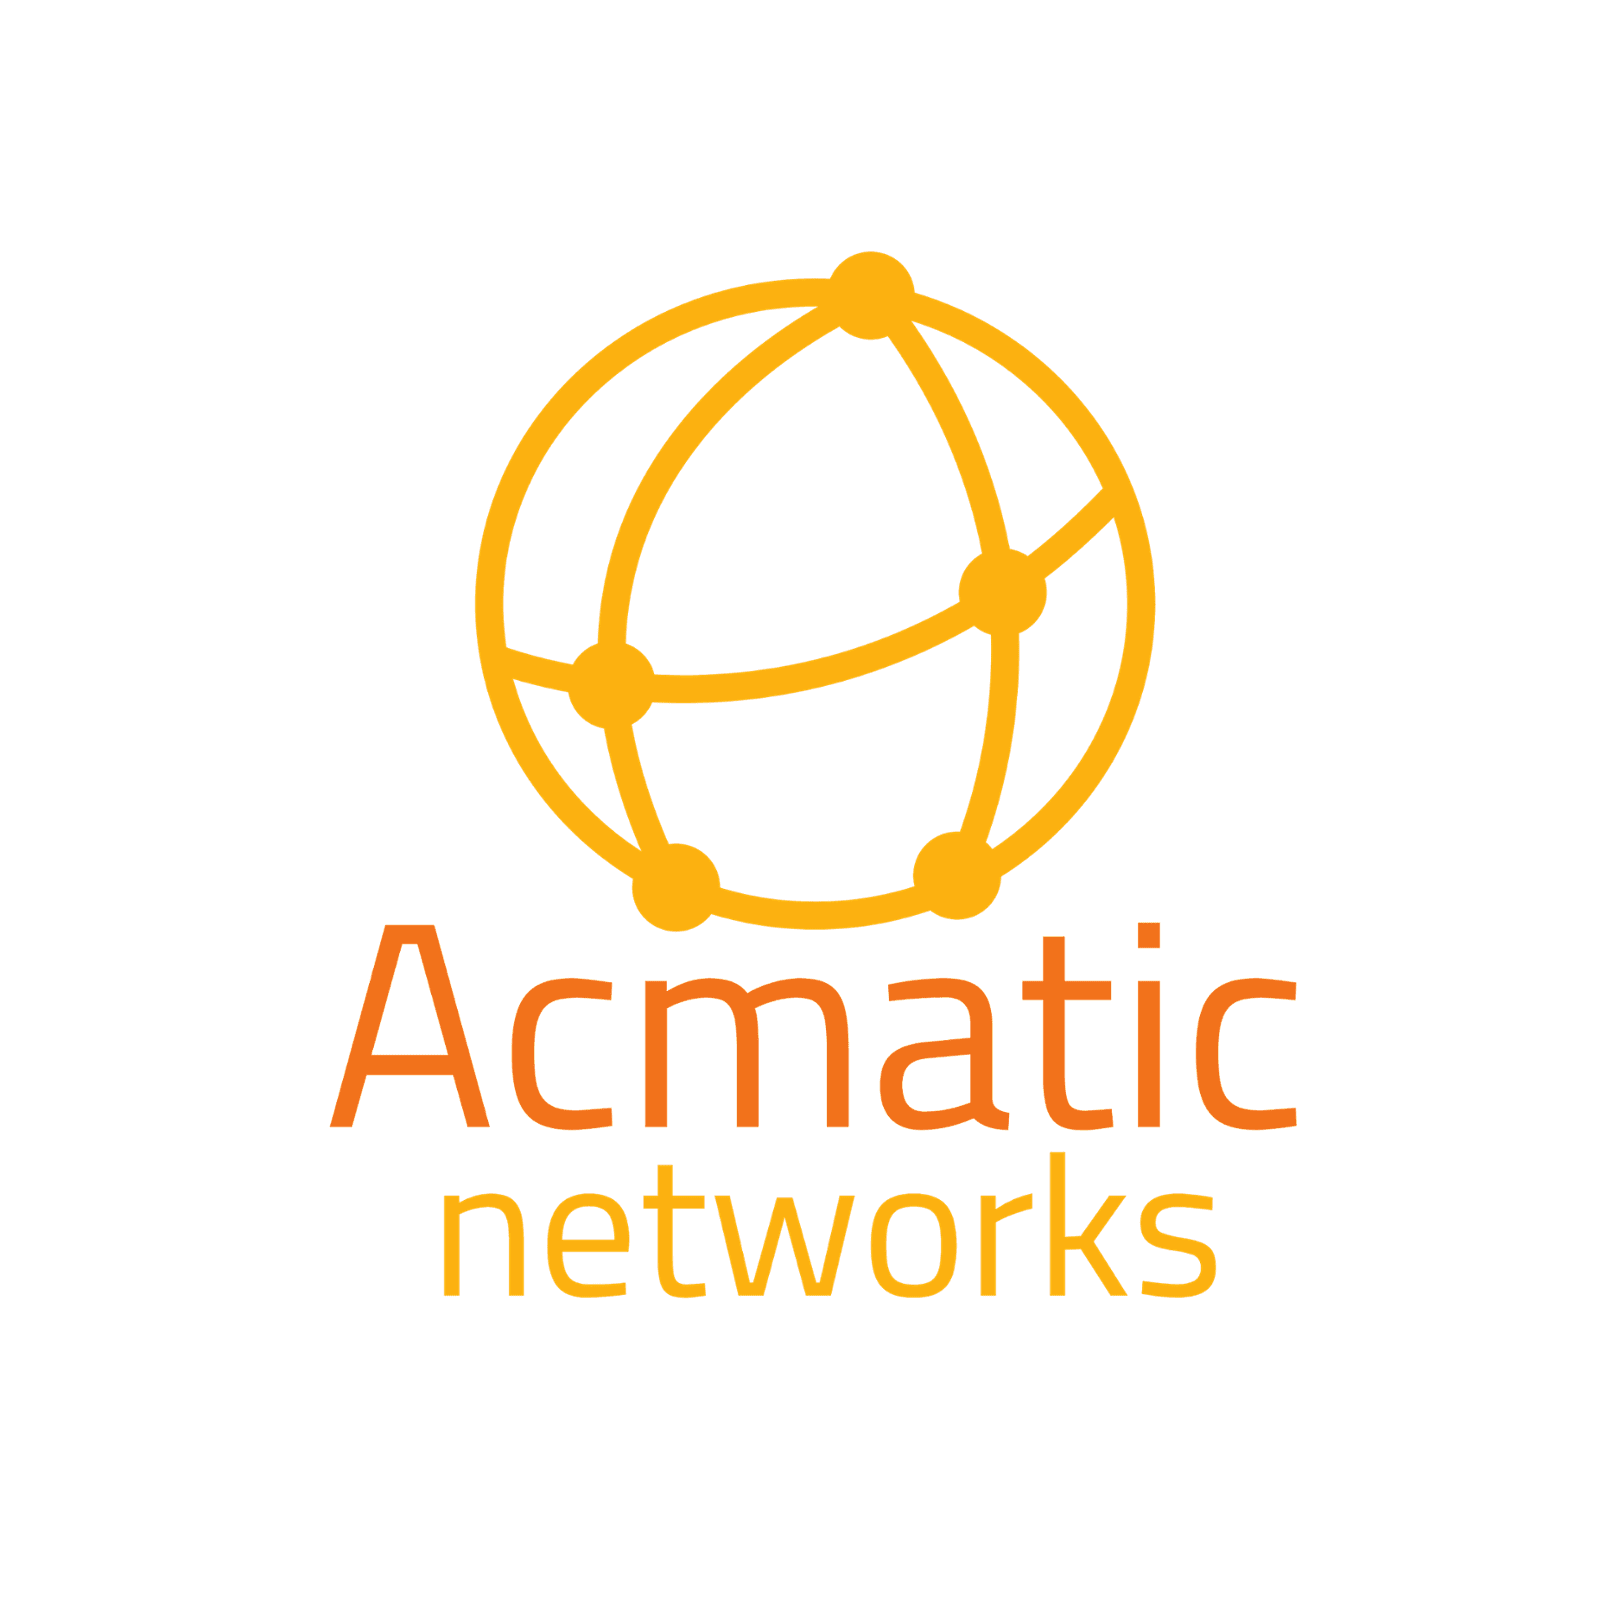 Acmatic Networks | Network Service Provider